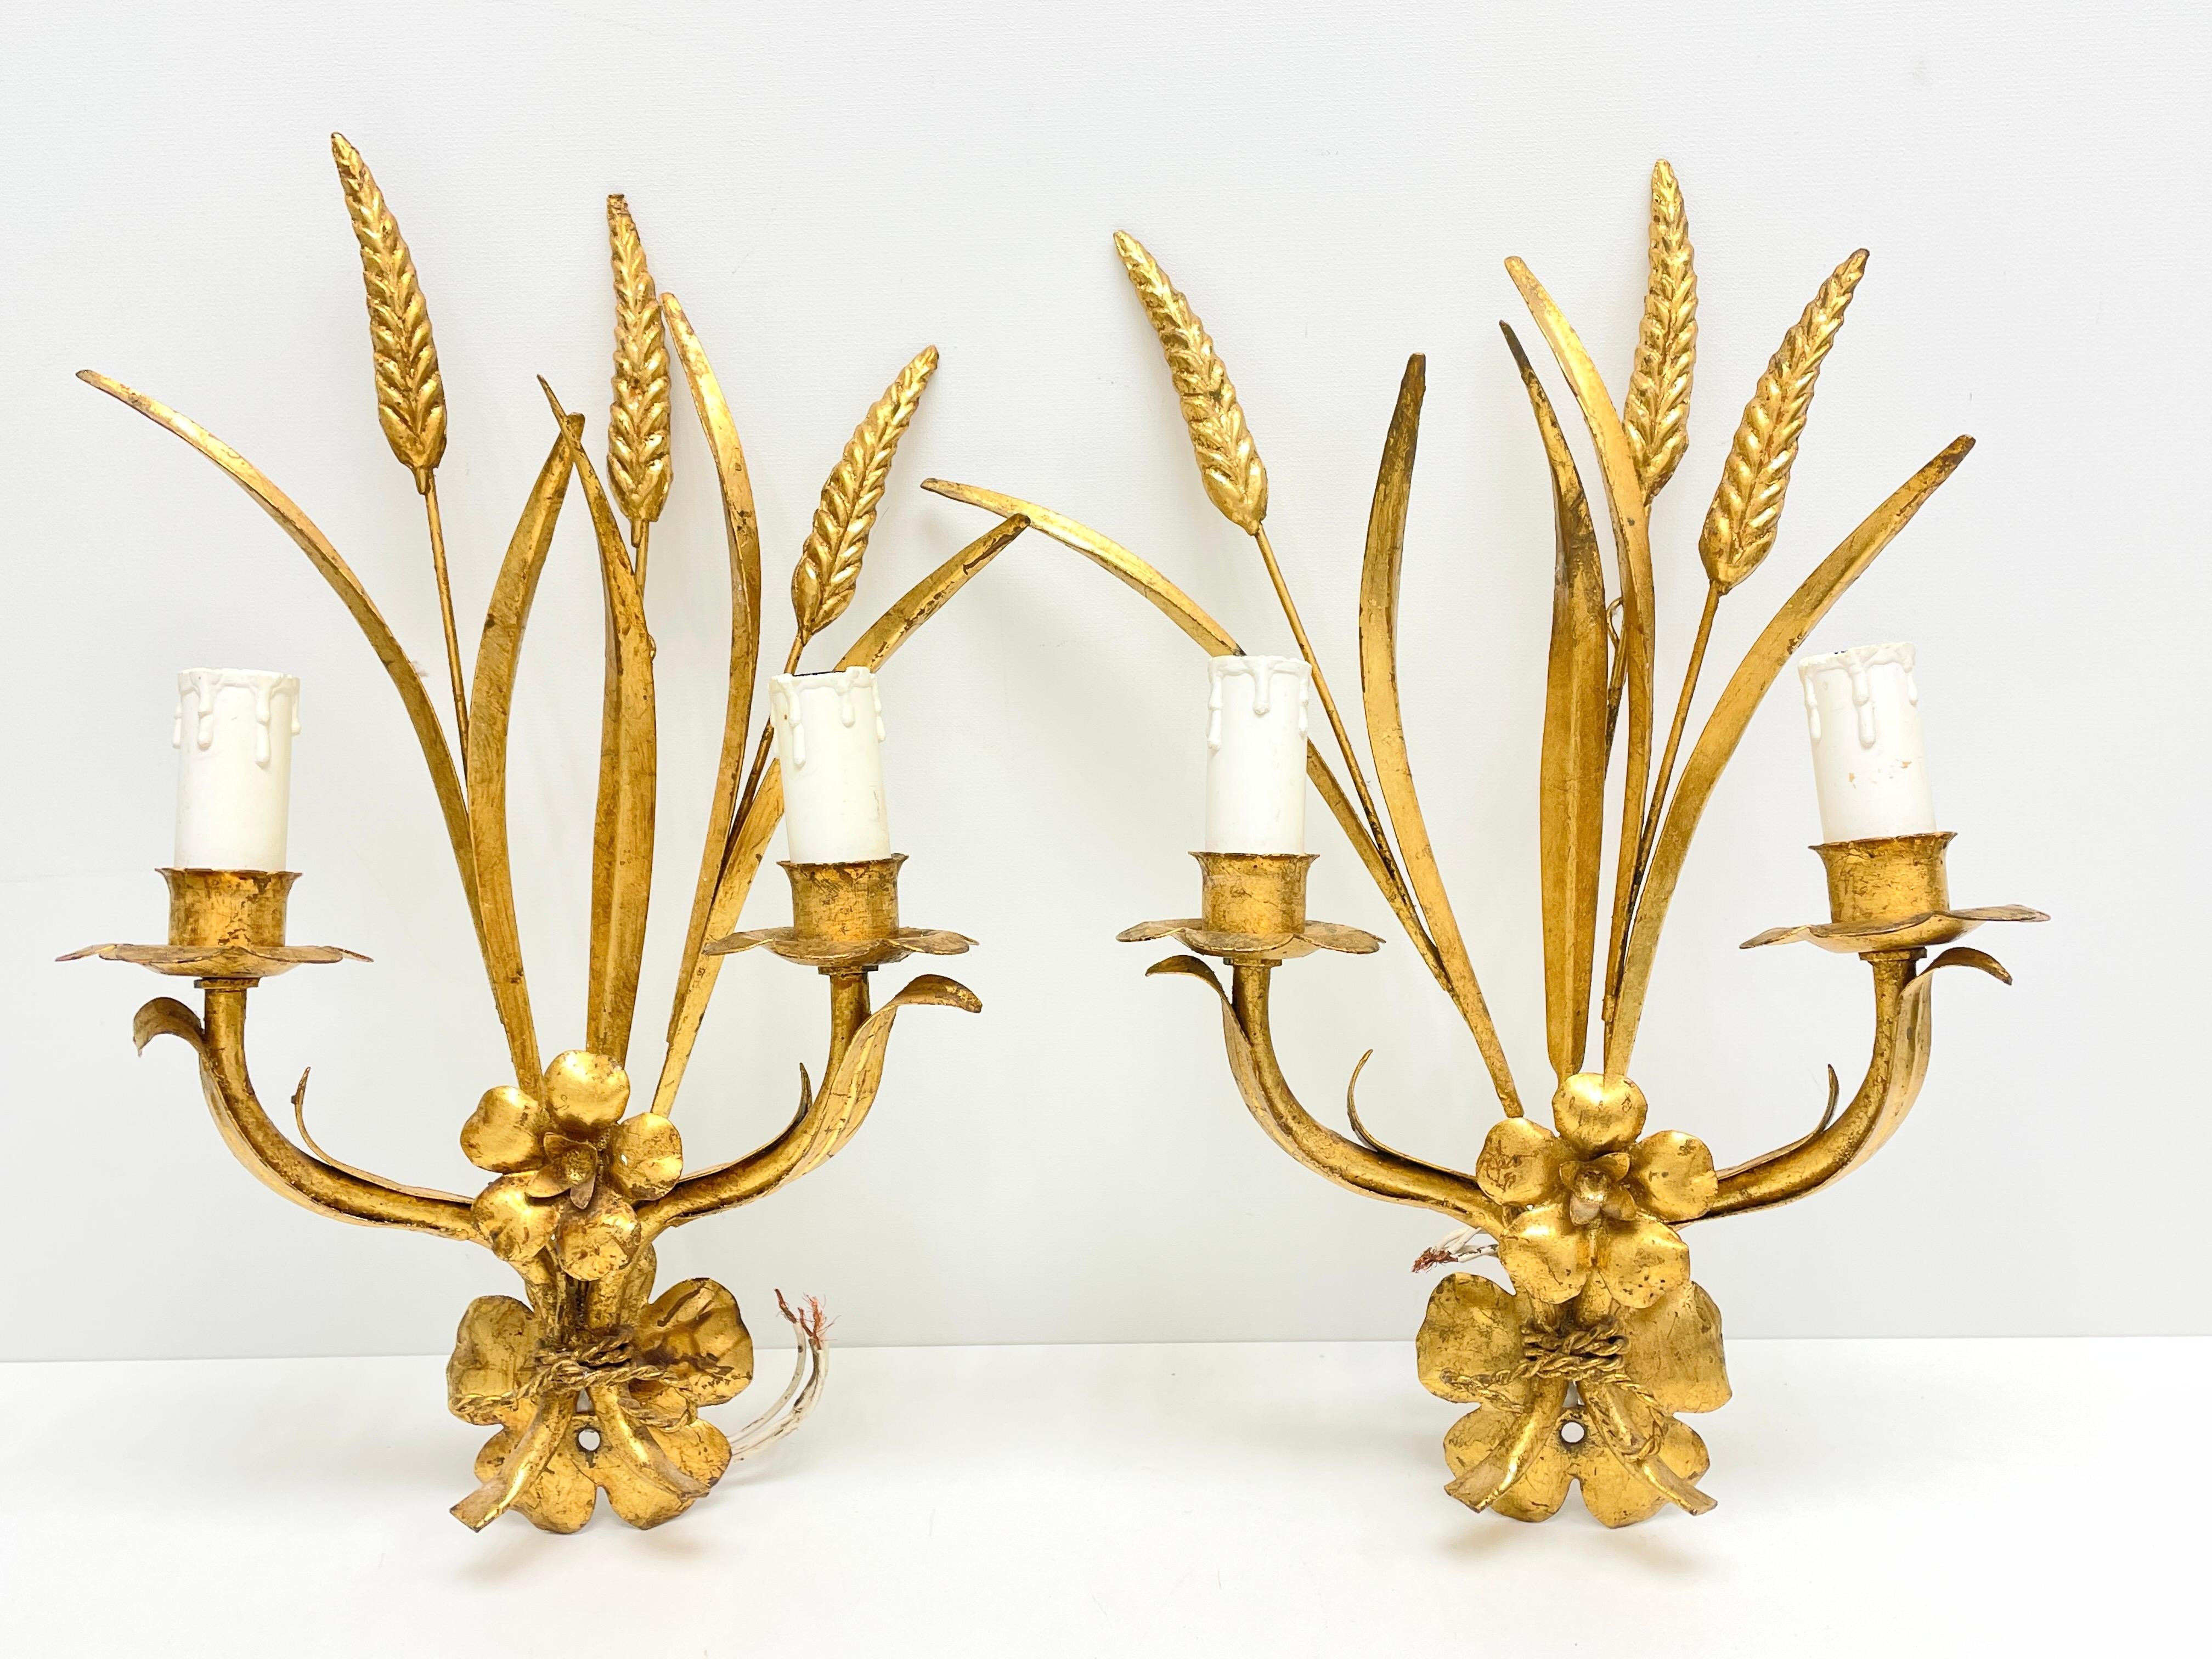 A pair Hollywood Regency midcentury gilt tole wheat sheaf sconces, each fixture requires two European E14 candelabra bulbs, each bulb up to 40 watts. The wall lights have a beautiful patina and gives each room a eclectic statement.